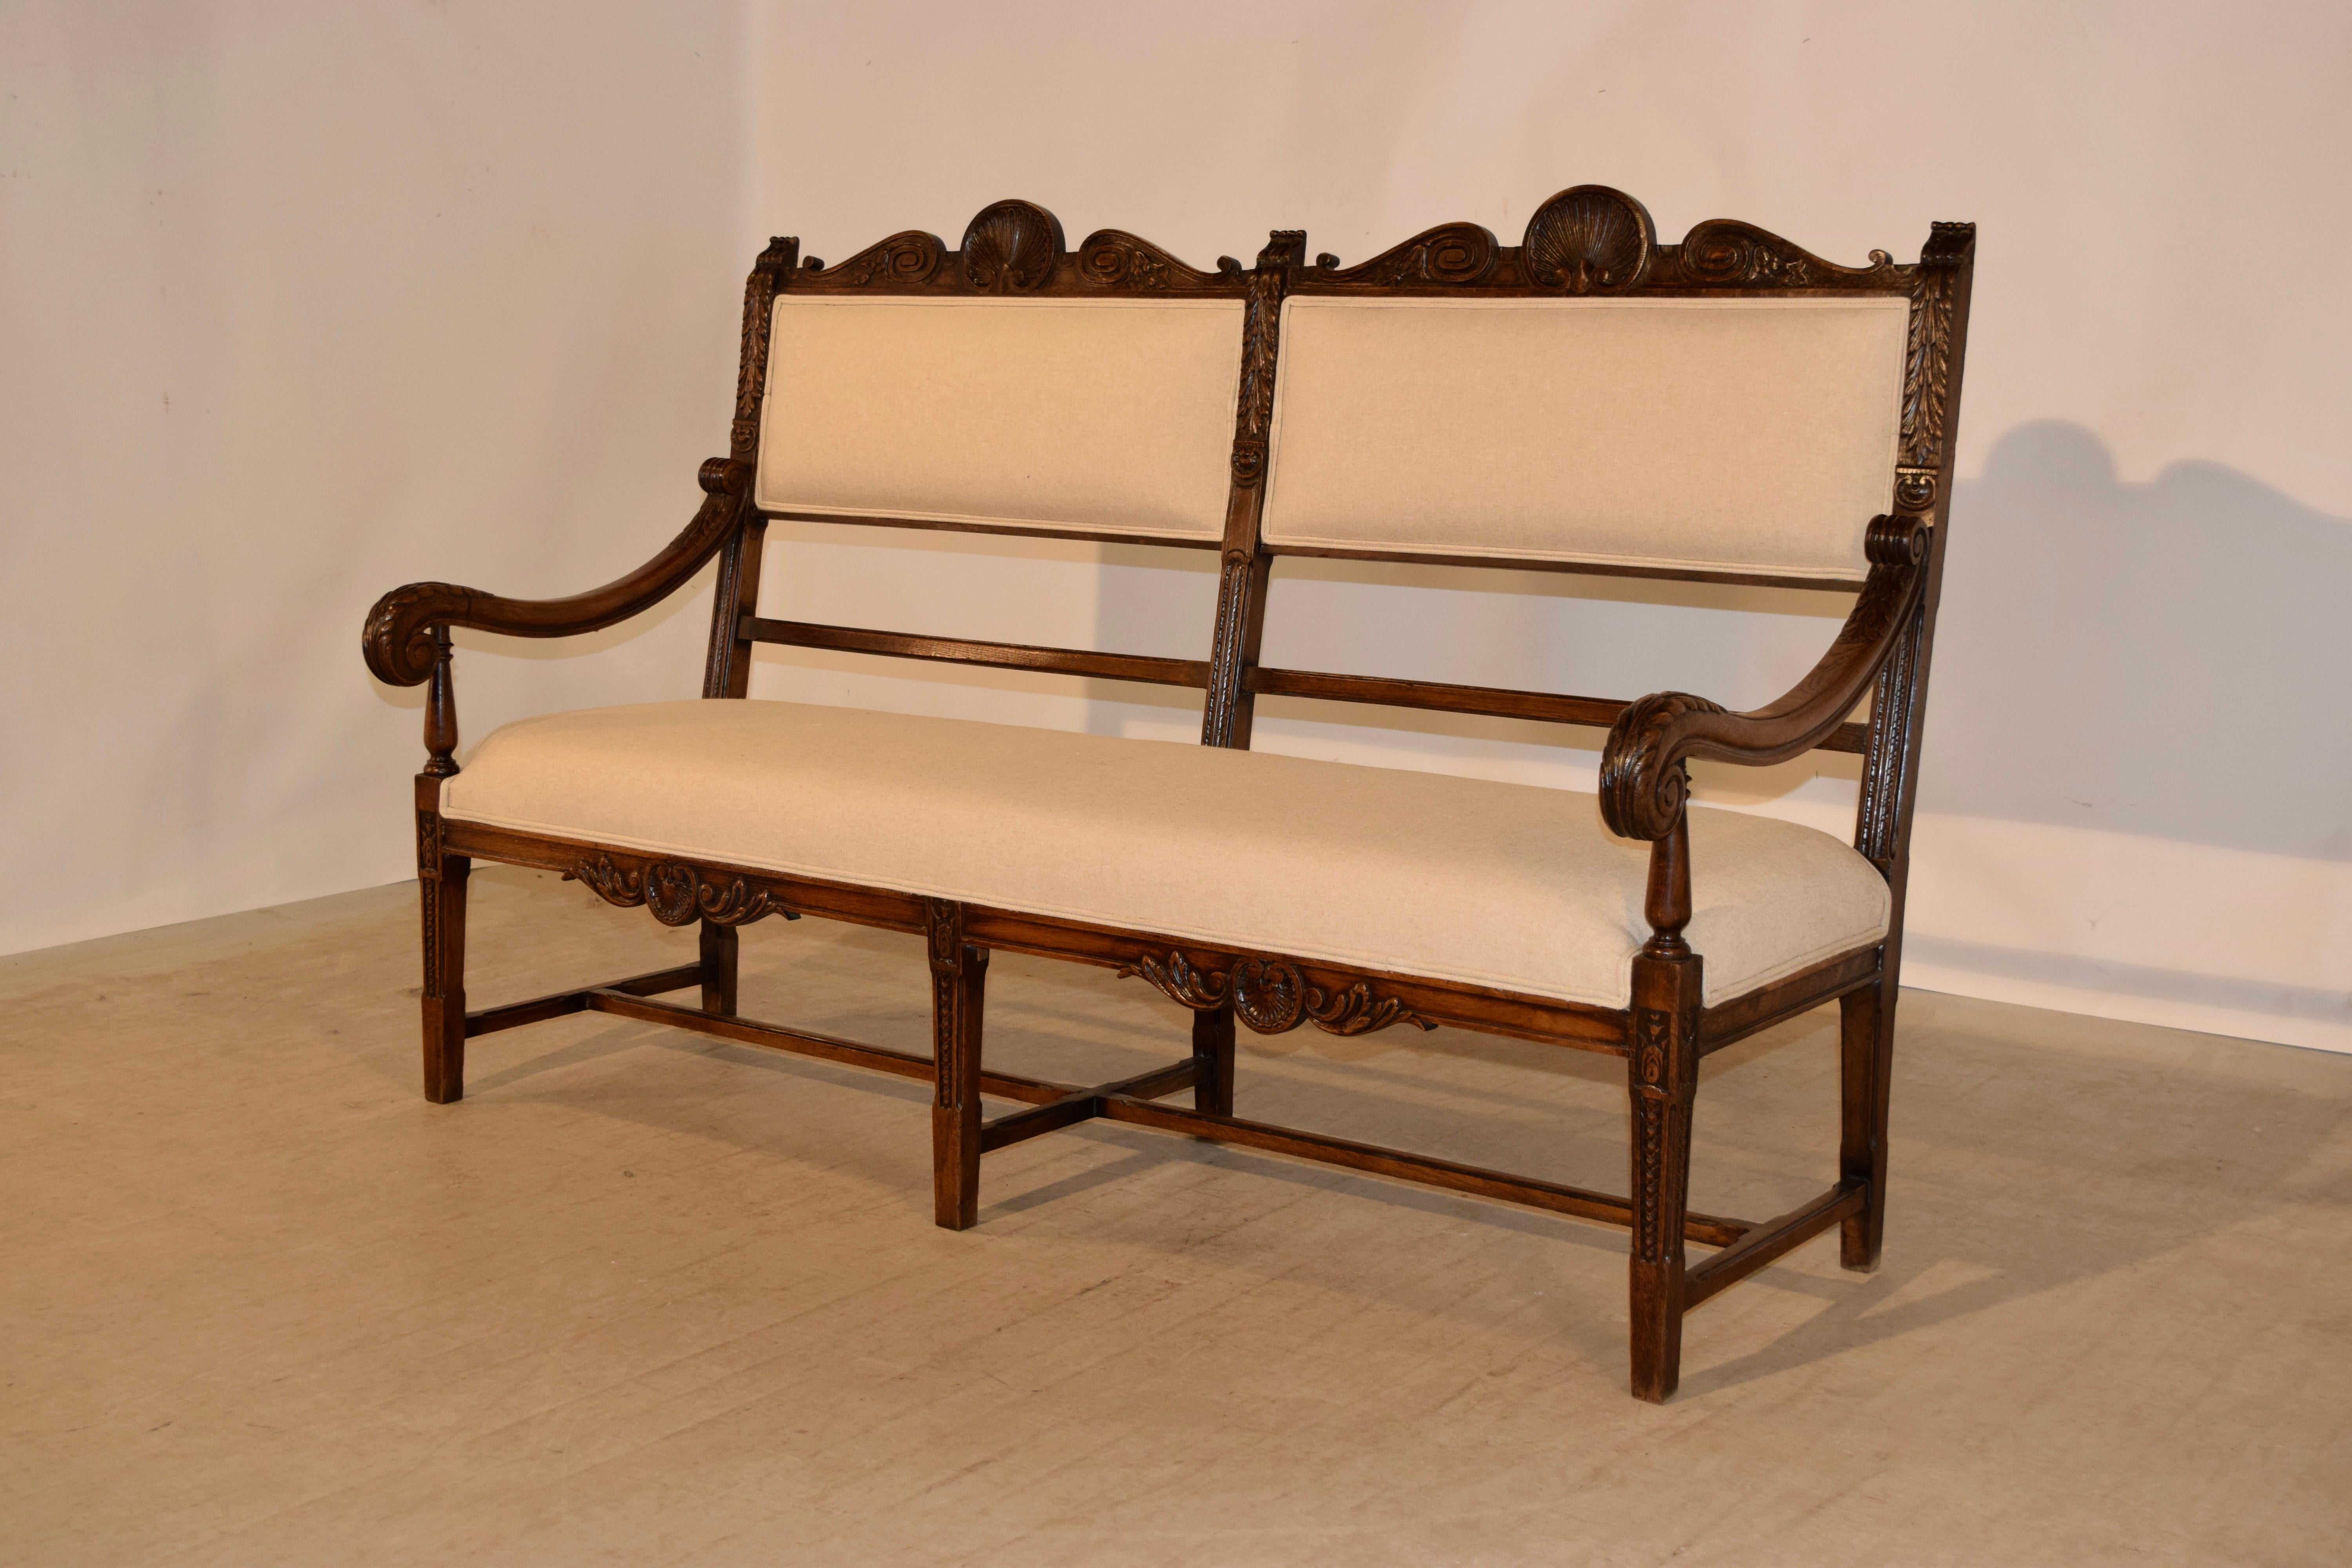 19th century upholstered bench from France made from oak with newly upholstered seat and back. The frame is ornately hand carved and has shell and leaf patterns with hand carved scrolled arms and supported on hand-turned legs joined by simple